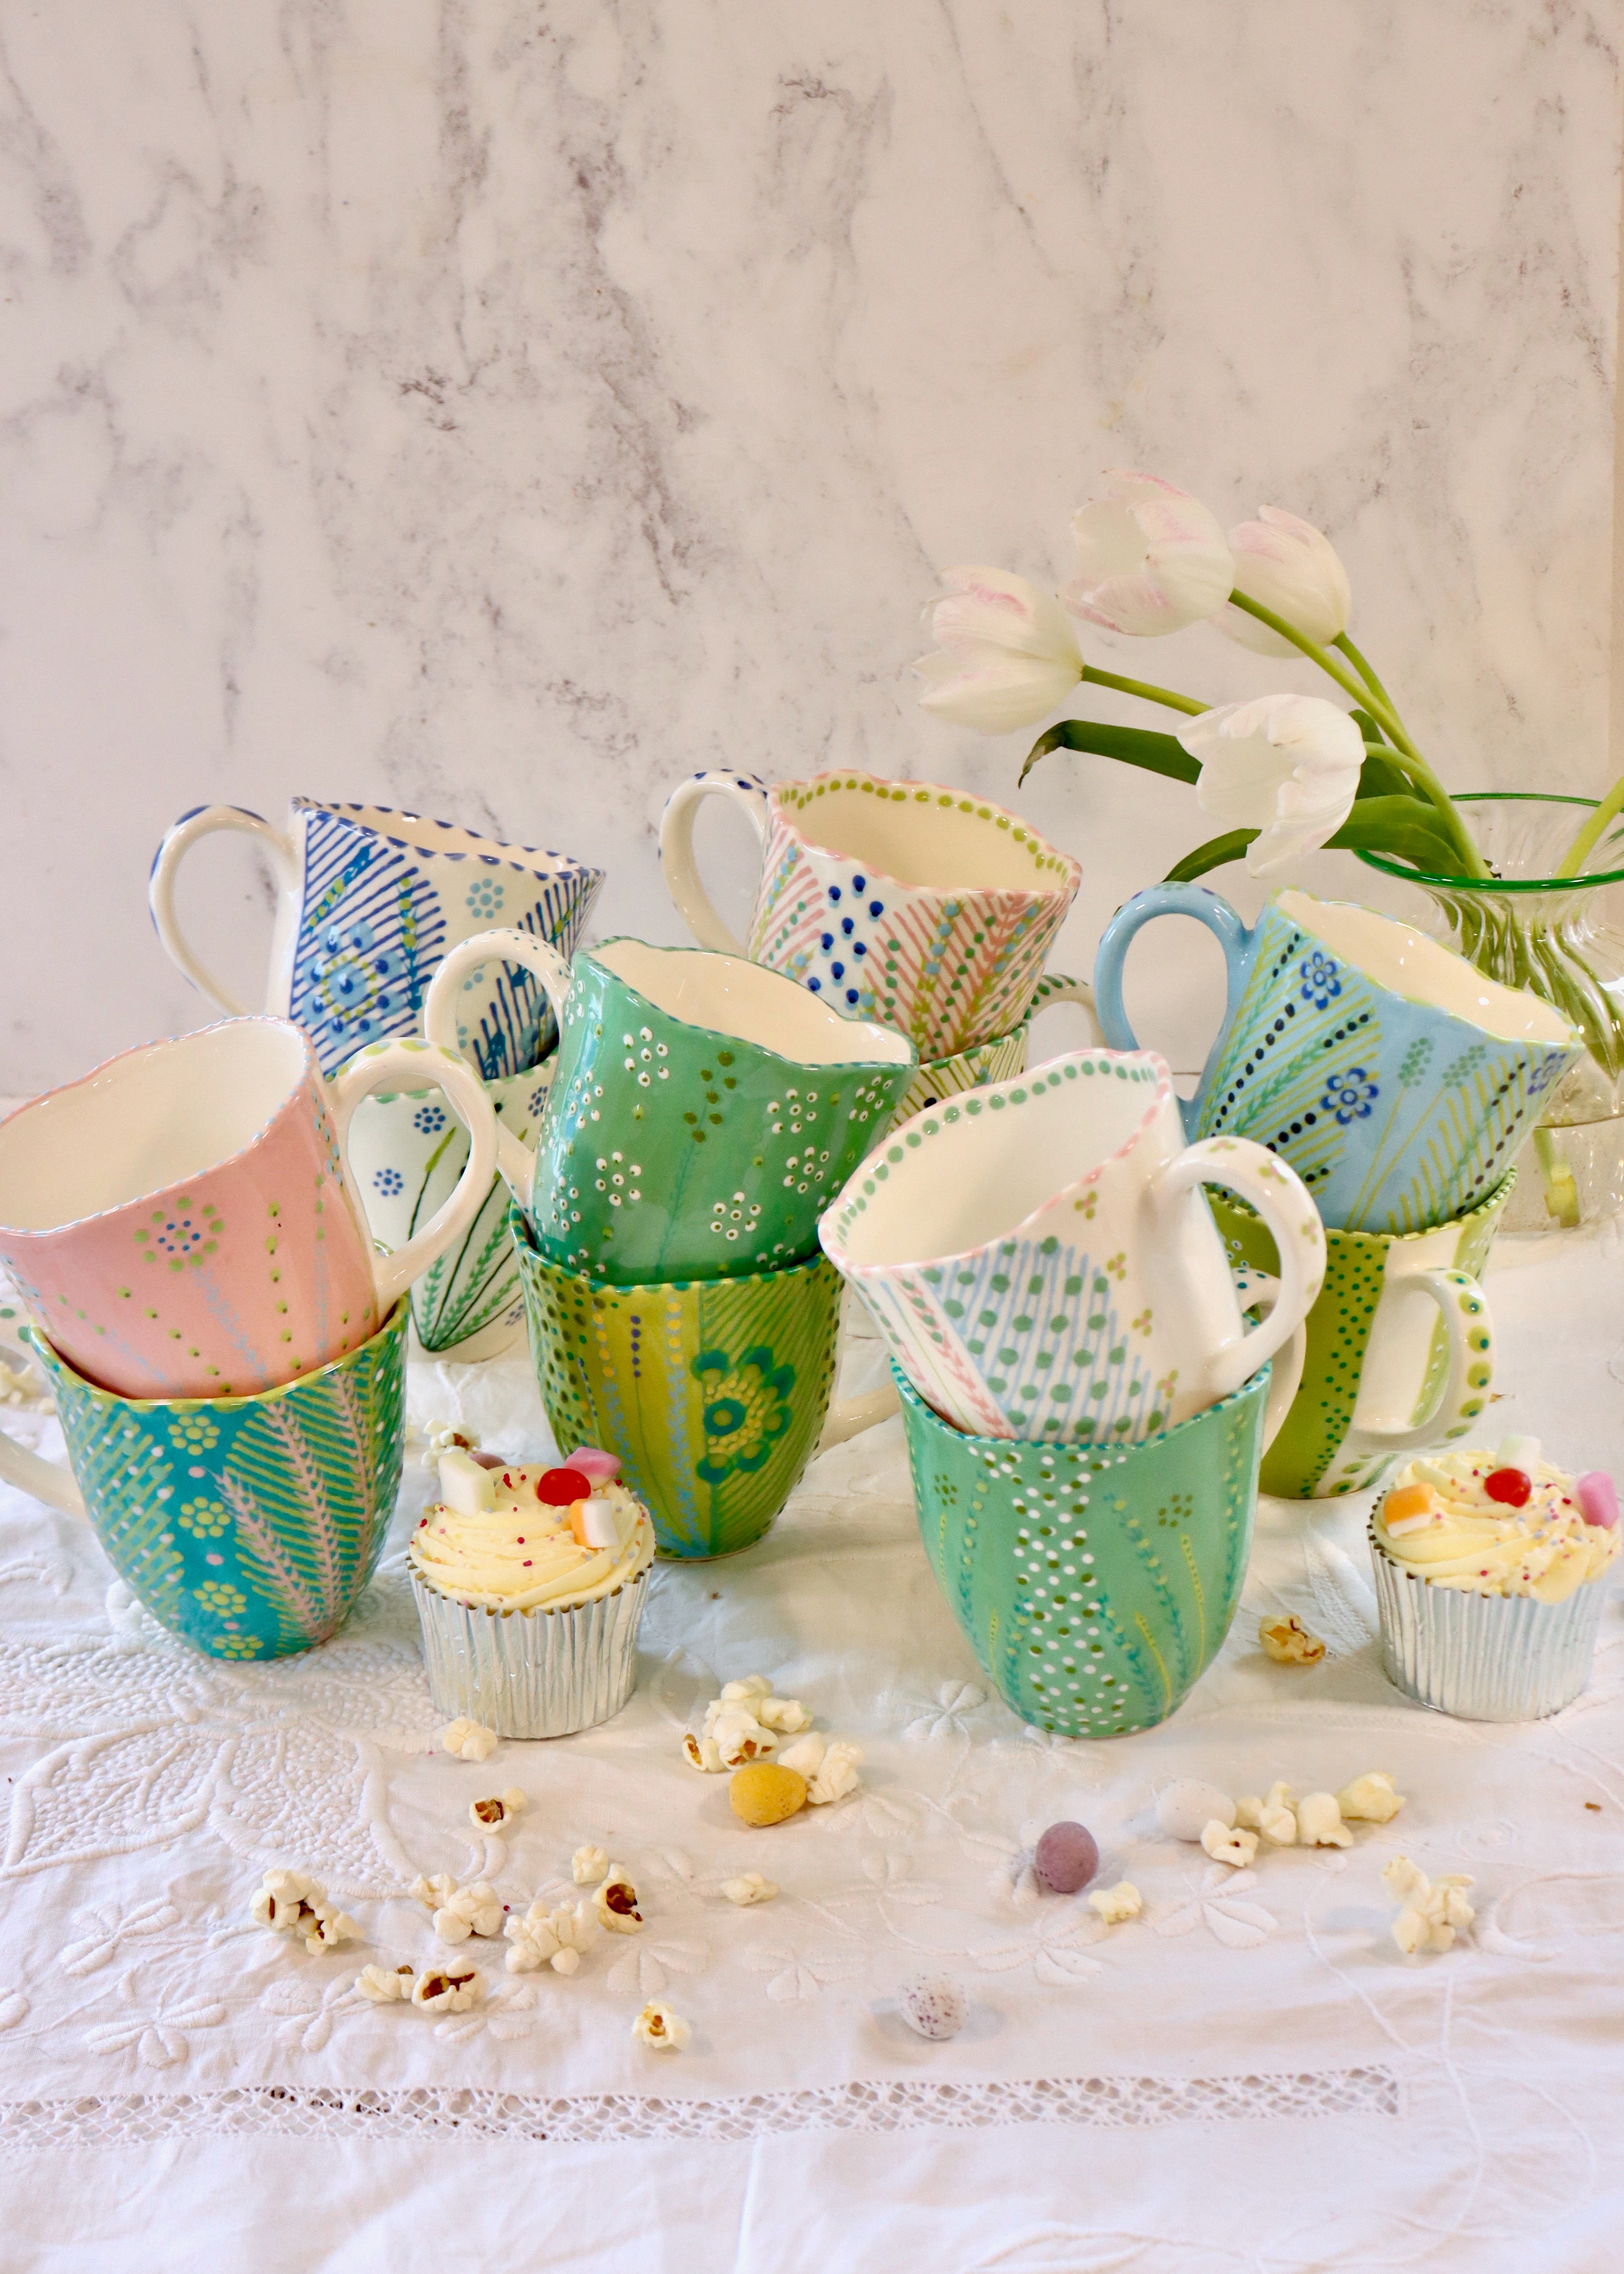 Waterlily Mug - White with Teal Daisy